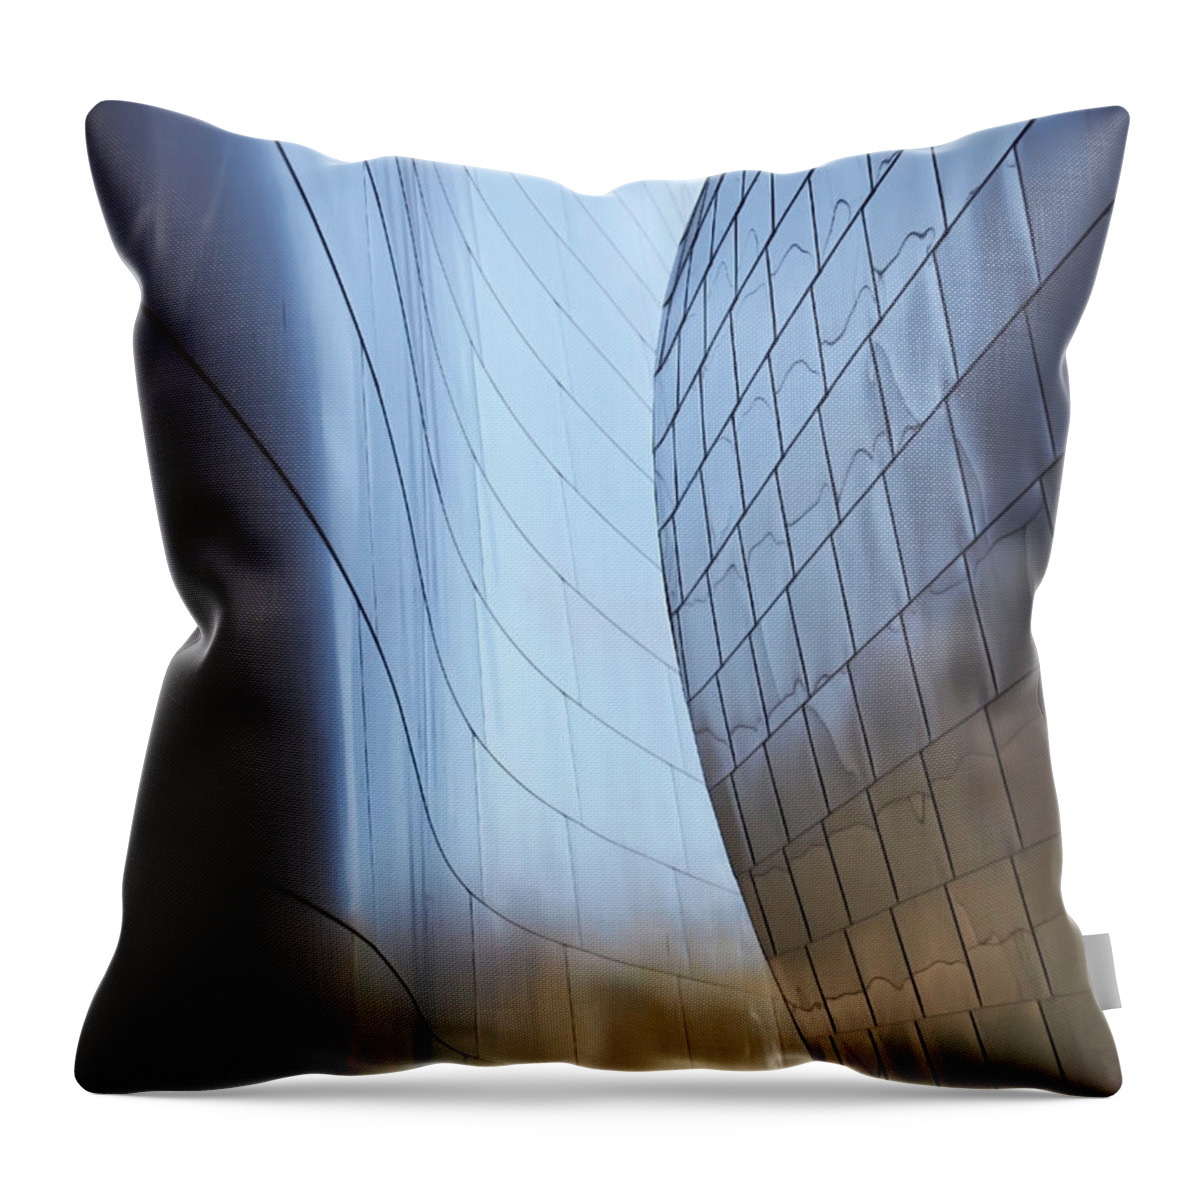 Abstract Throw Pillow featuring the photograph Undulating Steel by Rona Black